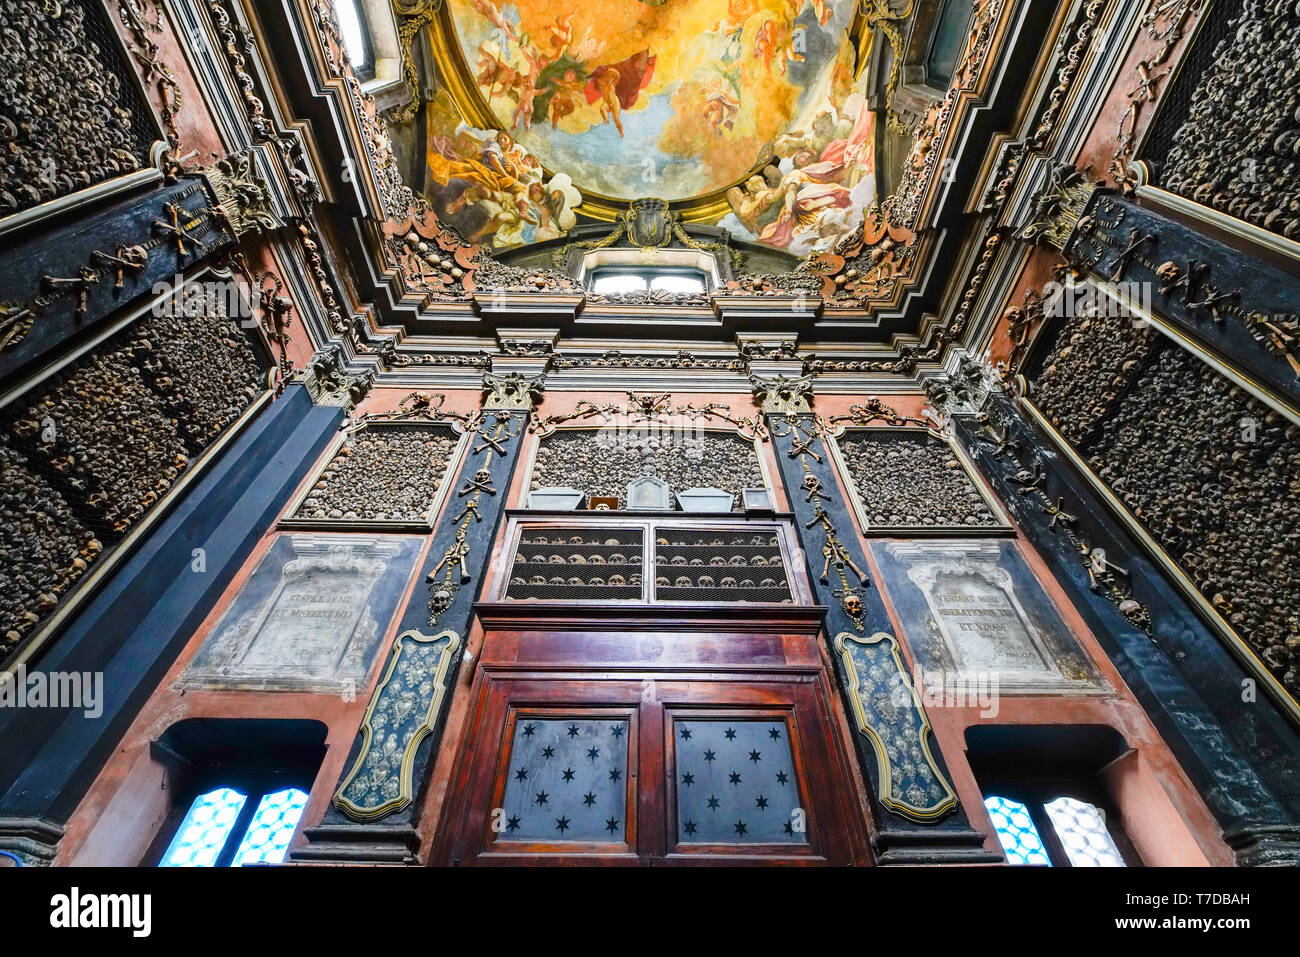 San Bernardino alle Ossa is a church in Milan famous for its ossuary. Italy. Stock Photo